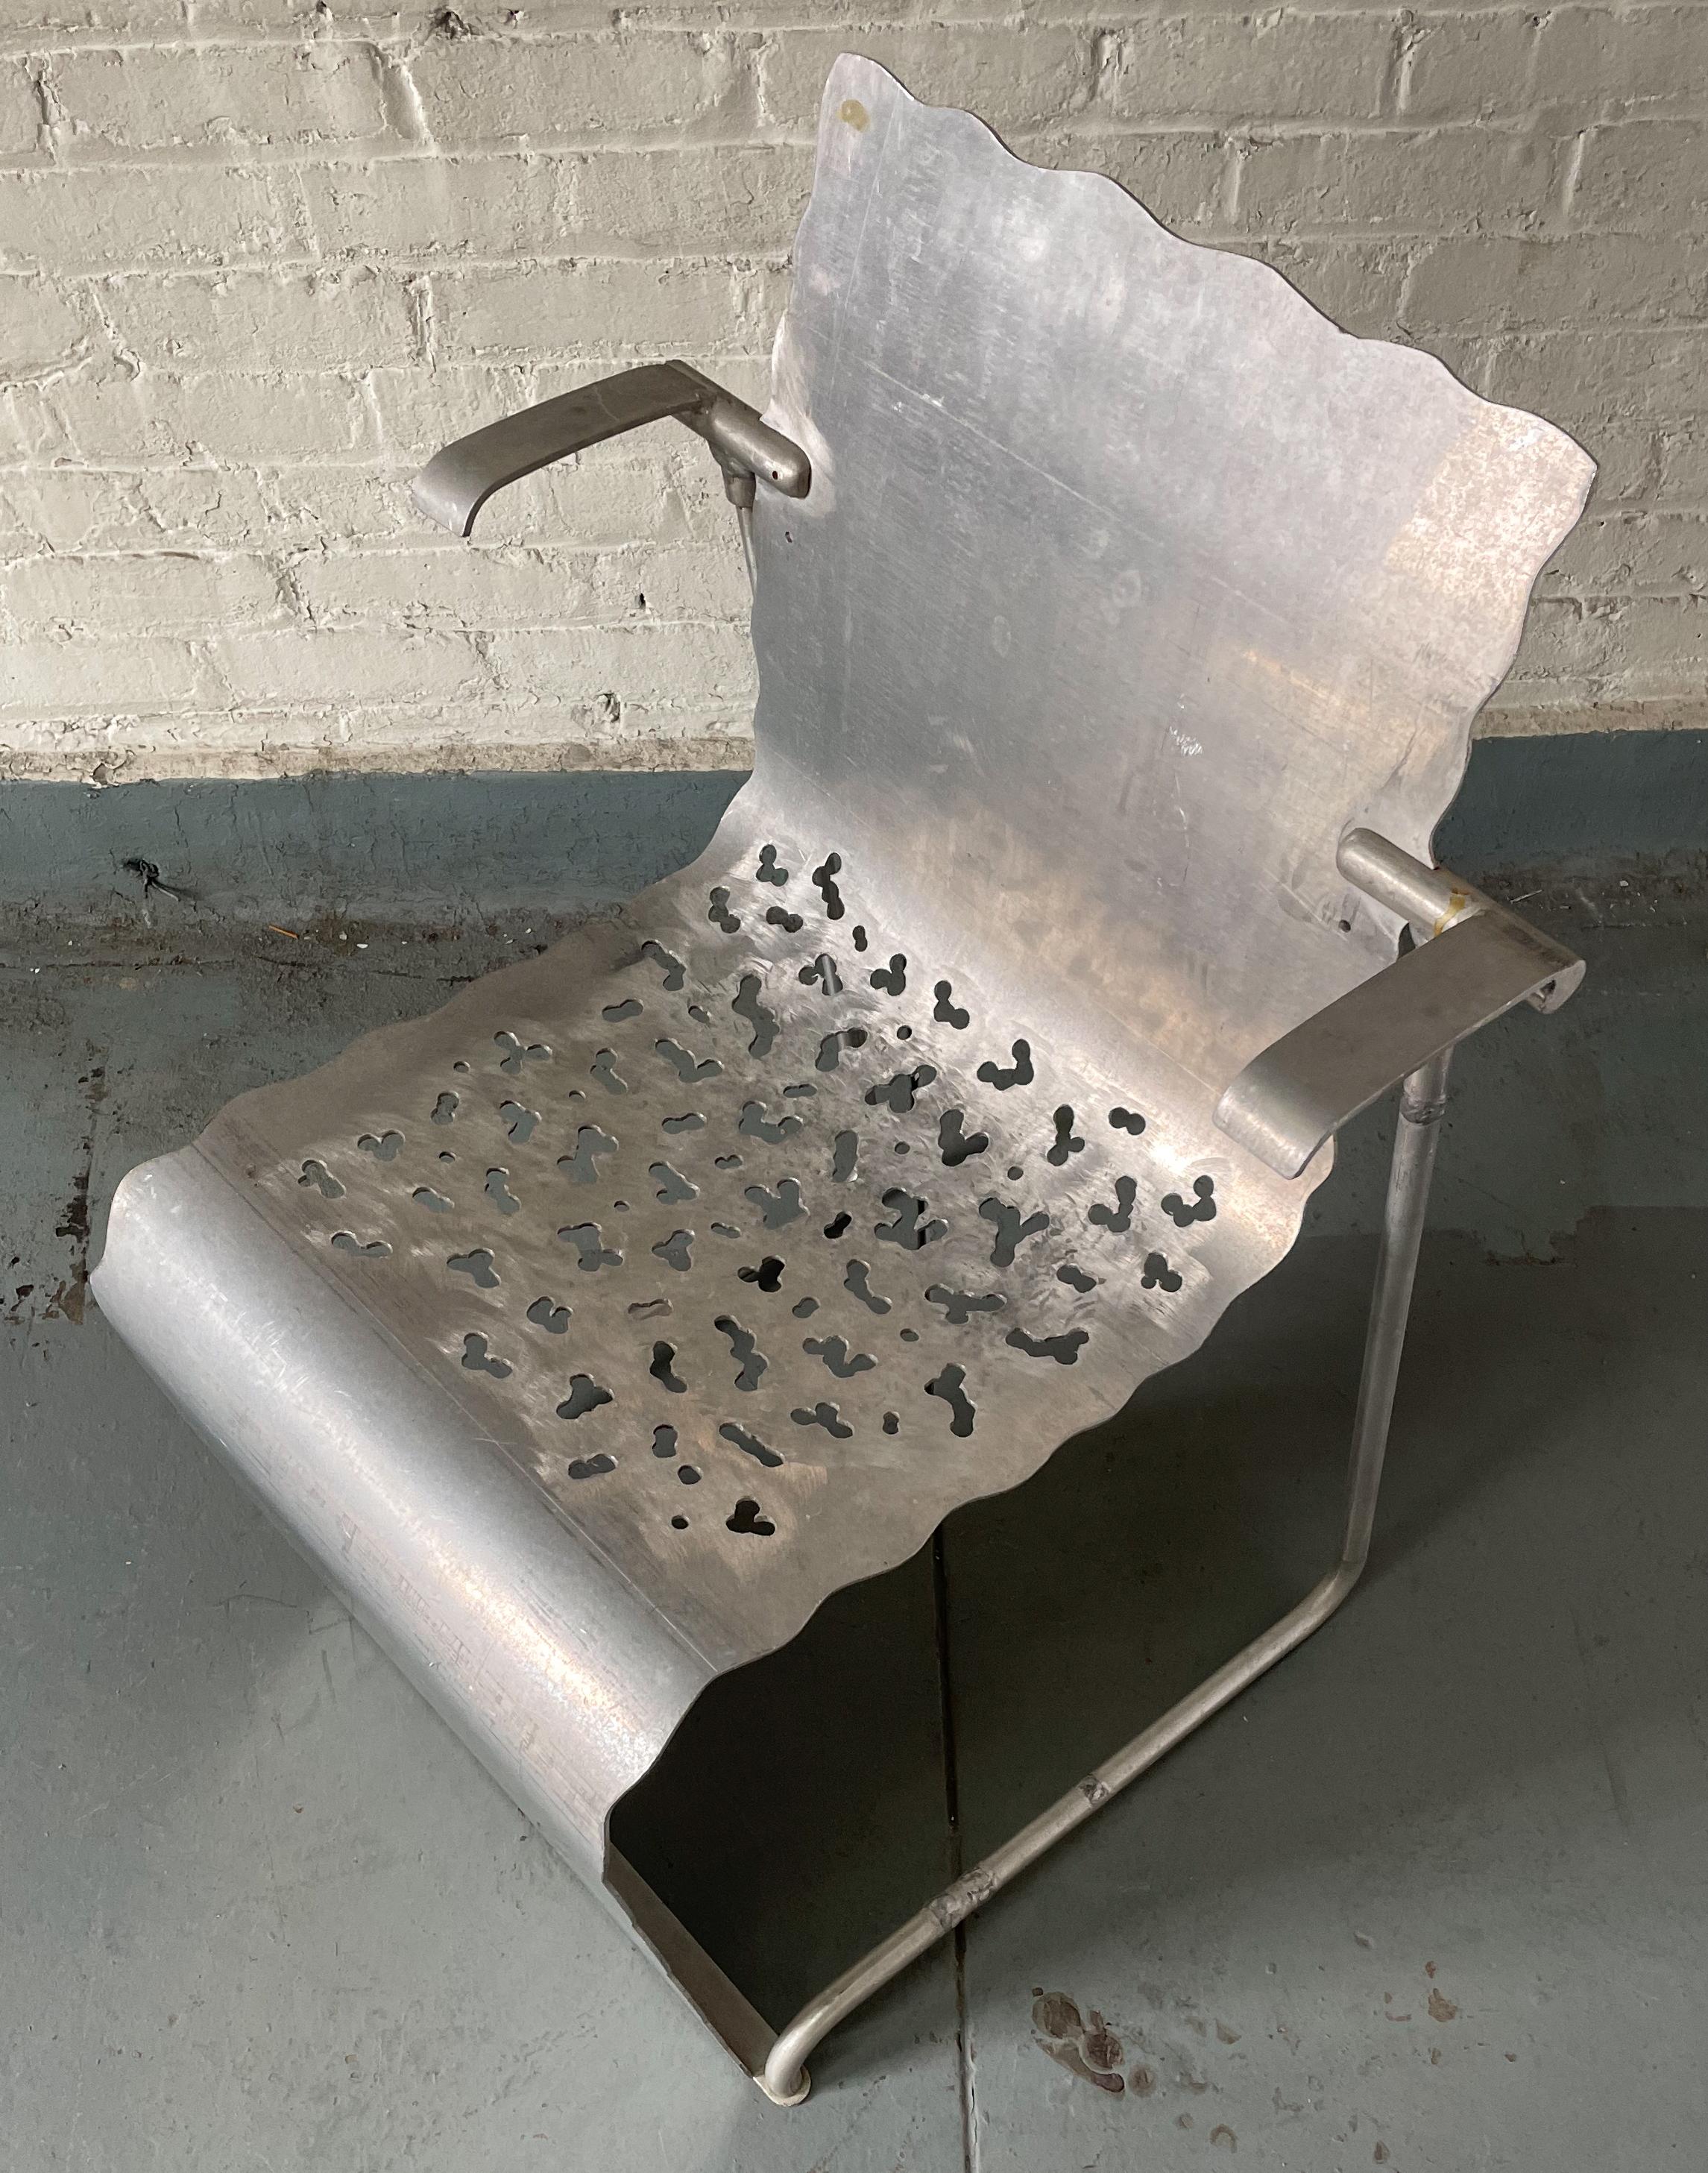 Prototype stacking chair hand-built of an aluminum sheet and tubular aluminum by furniture designer and artist Richard Schultz as a full-size 3-D model exploring the ergonomic and sculptural qualities of a design in which the seat is formed as a